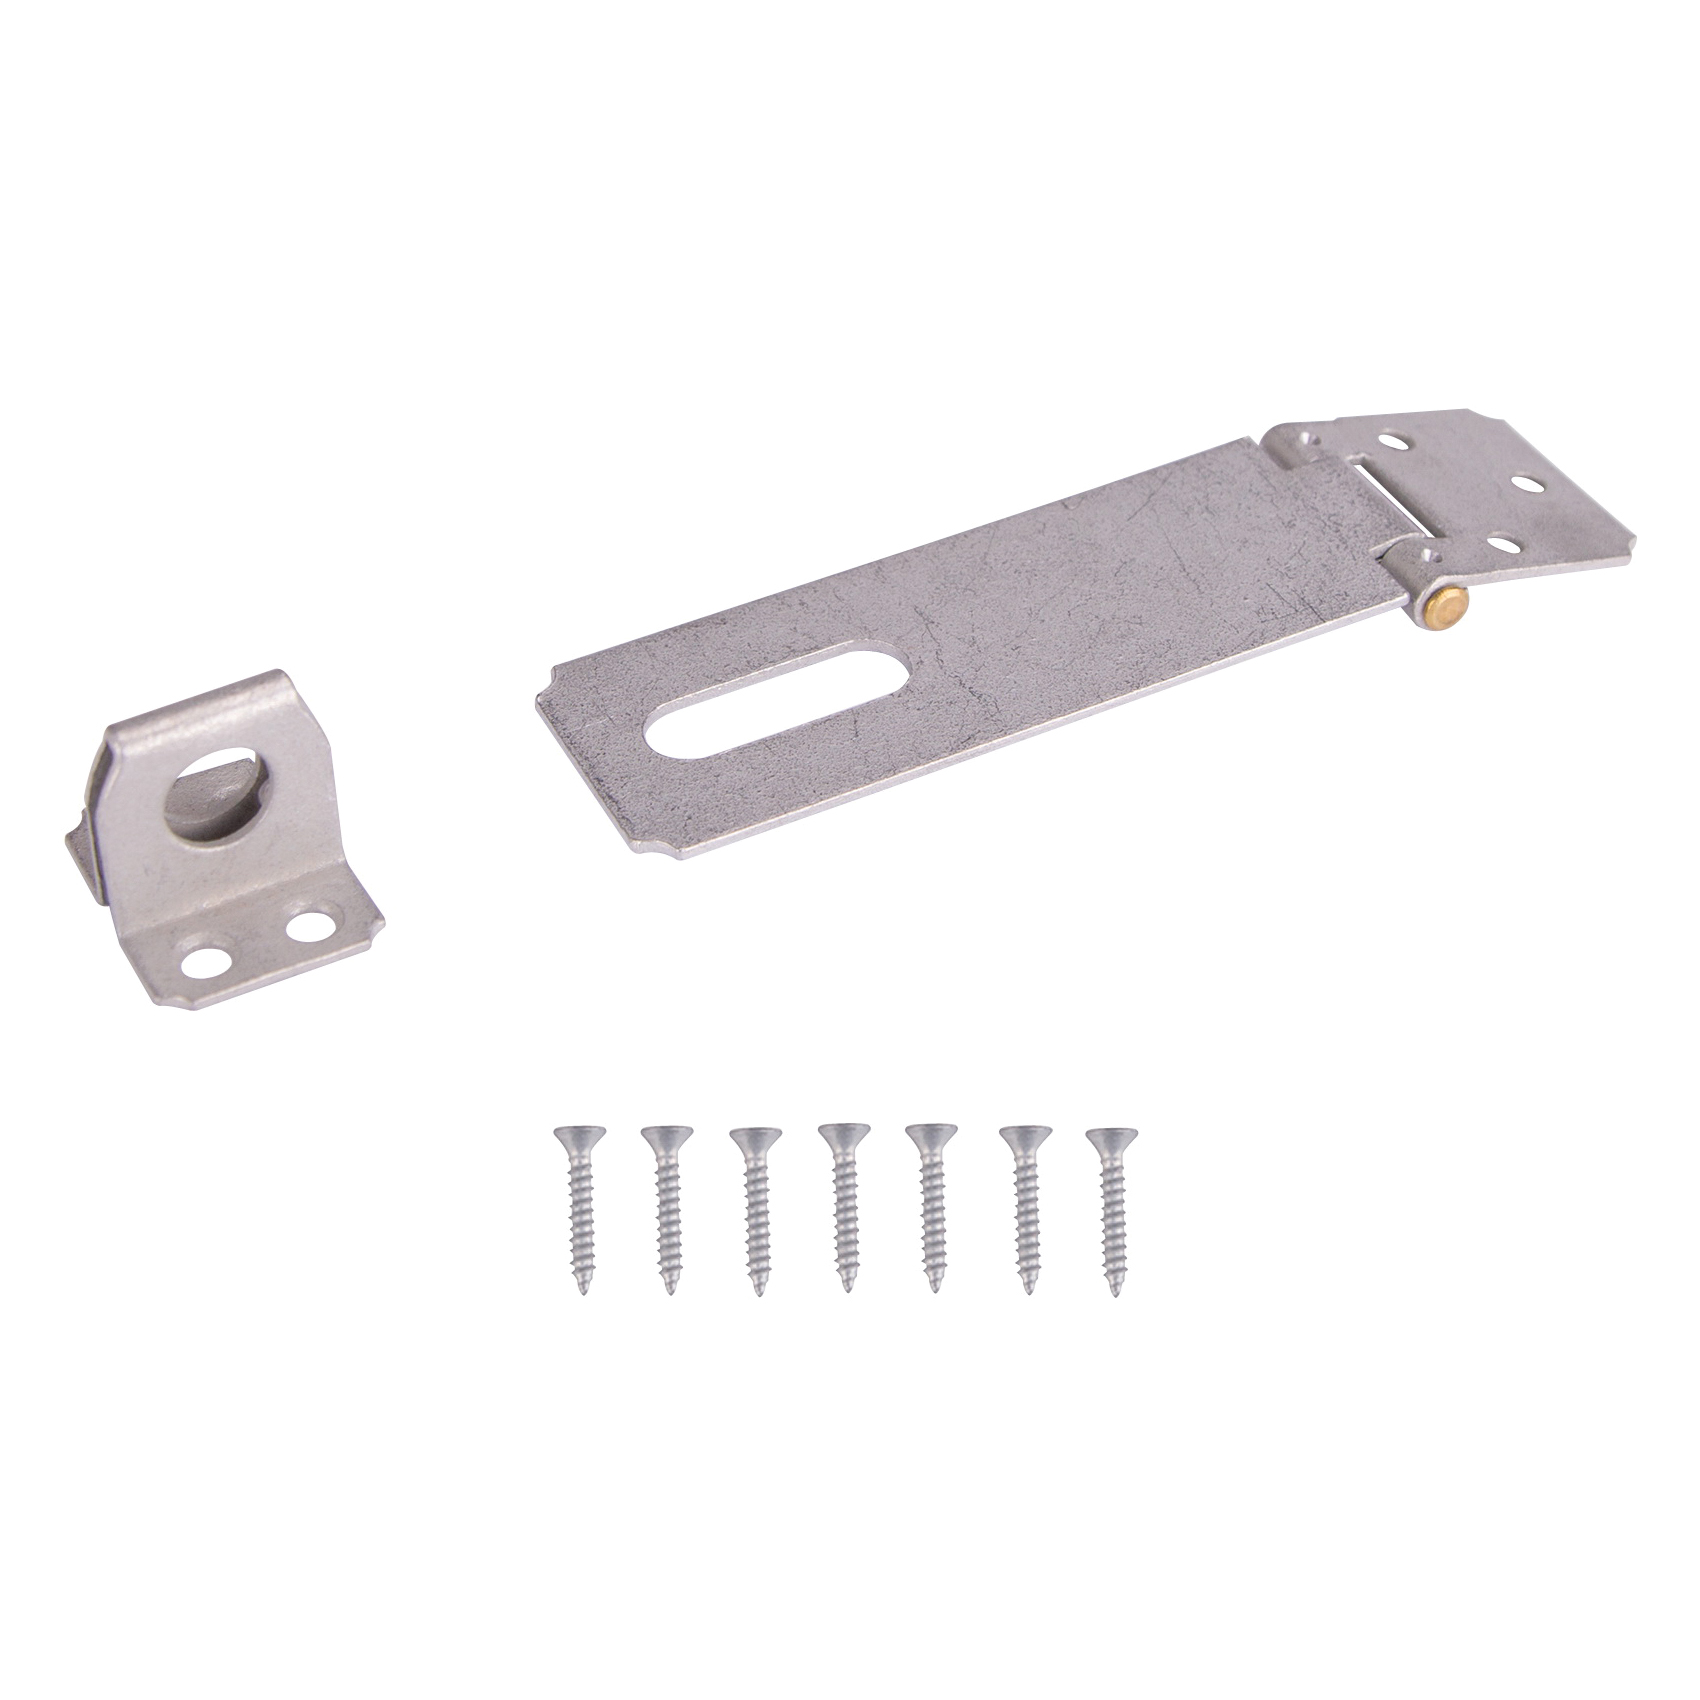 LR-132-BC3L-PS Safety Hasp, 4-1/2 in L, 4-1/2 in W, Steel, Galvanized, 7/16 in Dia Shackle, Fixed Staple